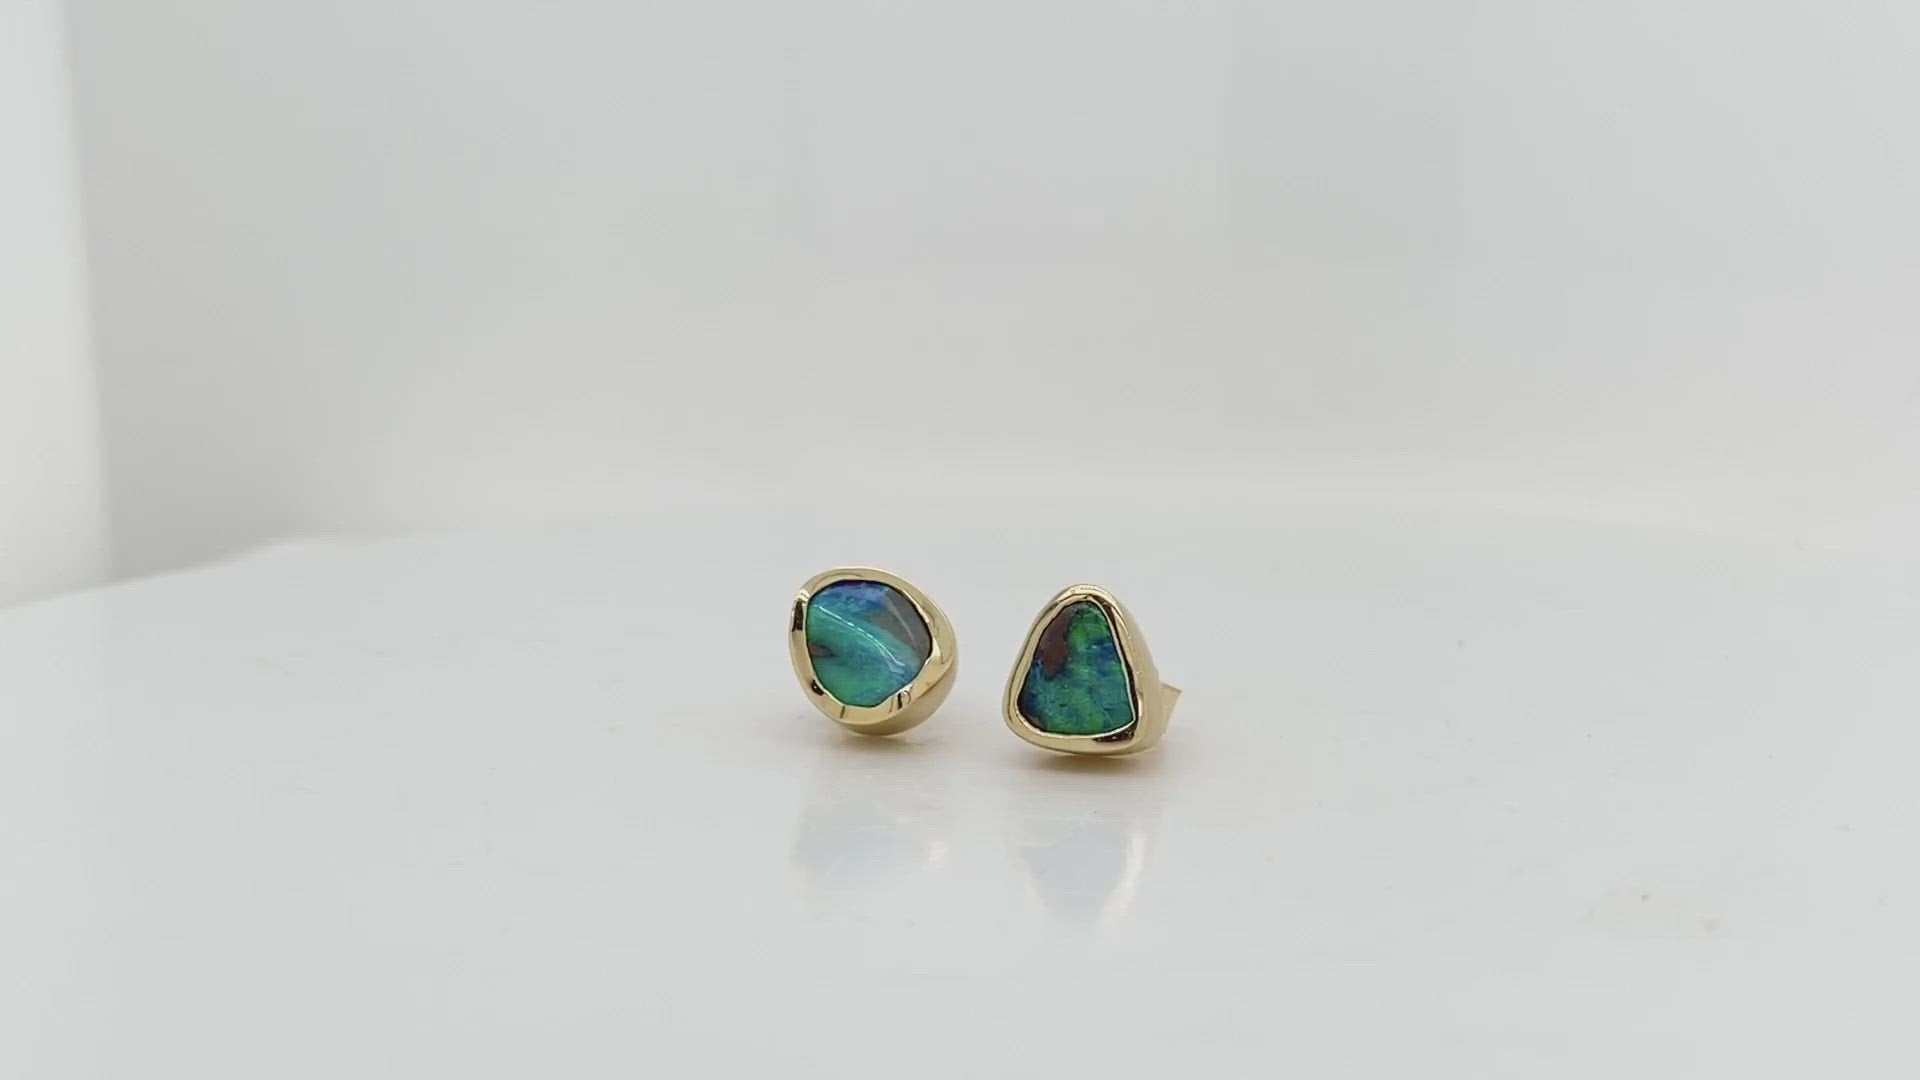 A Video- This remarkable pair of hand carved stud earrings showcases two natural Australian boulder opals with  vibrant flashes of oceanic blue and green. These exquisite gems are delicately wrapped in 18kt yellow gold with a luxurious satin finish. These opals are true works of art and will likely become a treasured family heirloom to be handed down form generation to generation. 